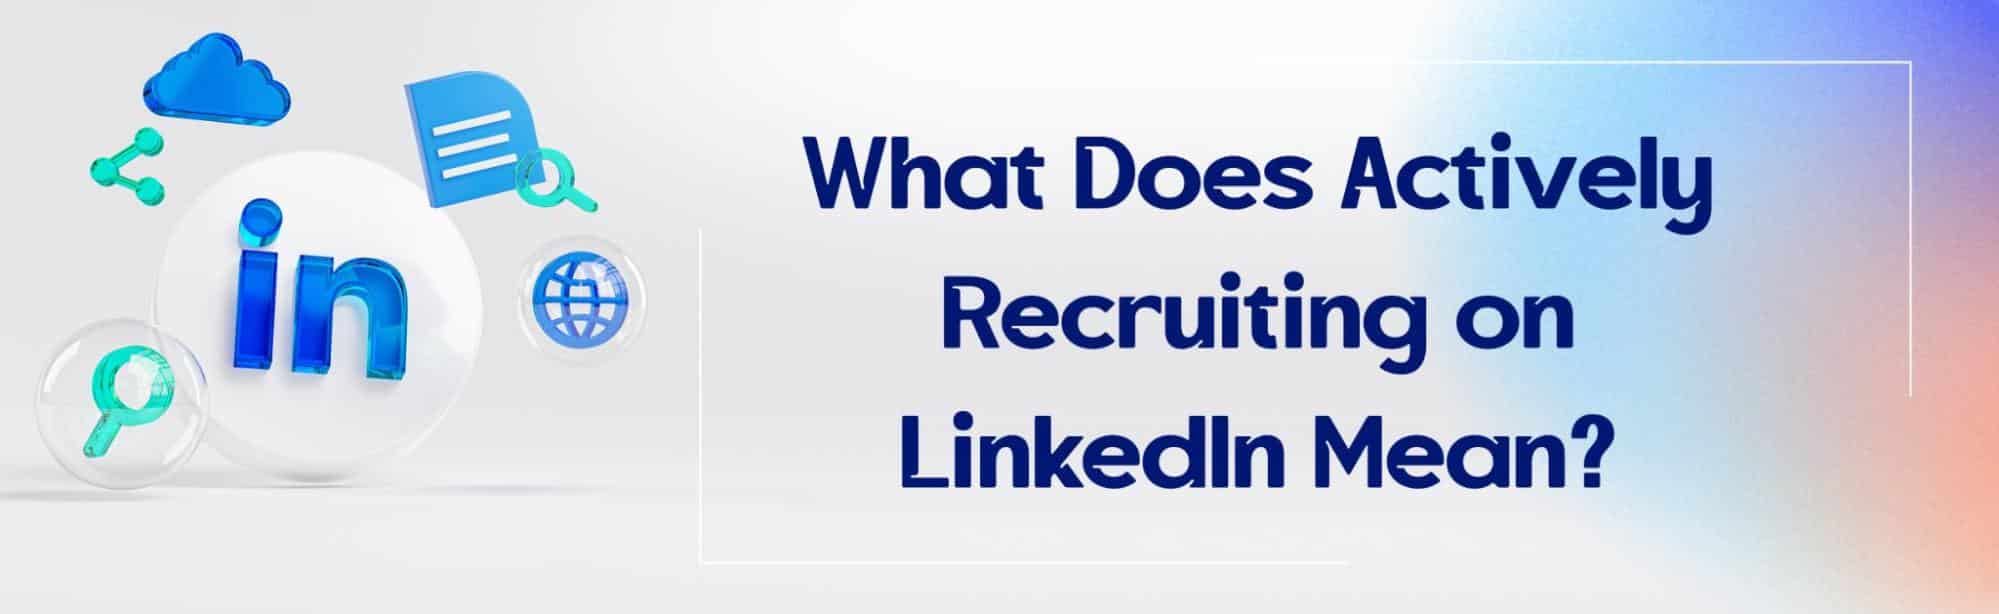 What Does Actively Recruiting on LinkedIn Mean?